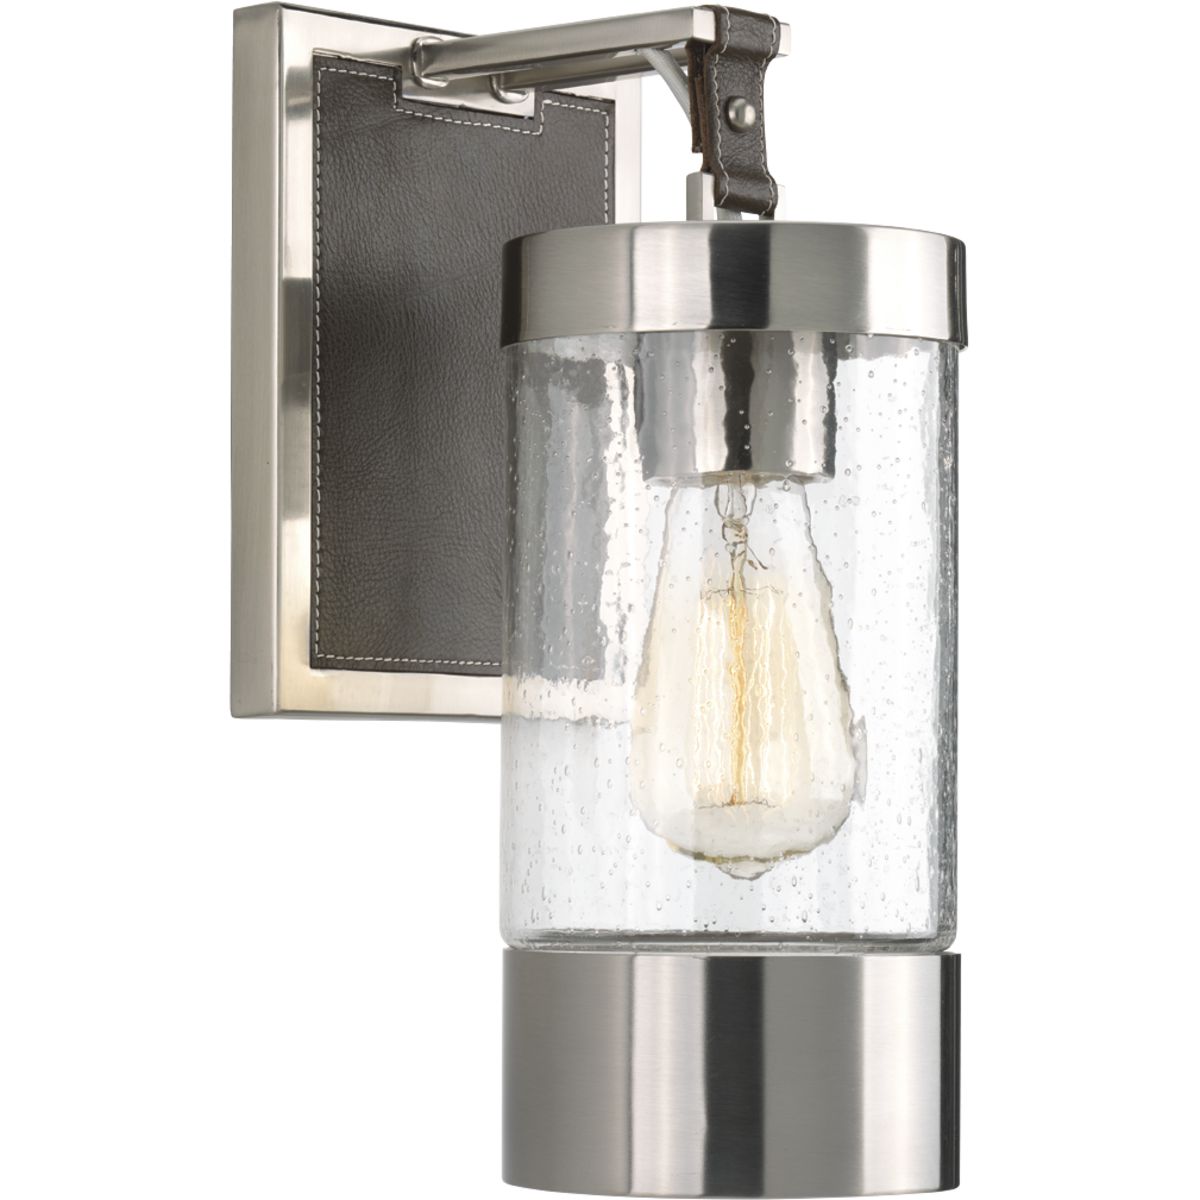 The Lookout wall sconce has a modern classic styling that combines Brushed Nickel, clear seeded glass and handsome leather accents for an enduring sensibility that adds an uncomplicated elegance to any interior. Entirely at home in so many locations and lifestyles, the Lookout sconce is ideal to use when multiples are a must. This fixture is part of the Jeffrey Alan Marks Point Dume� lighting collection which celebrates a curated mix of yesterday and today, distilling both industrial and artisanal influences.